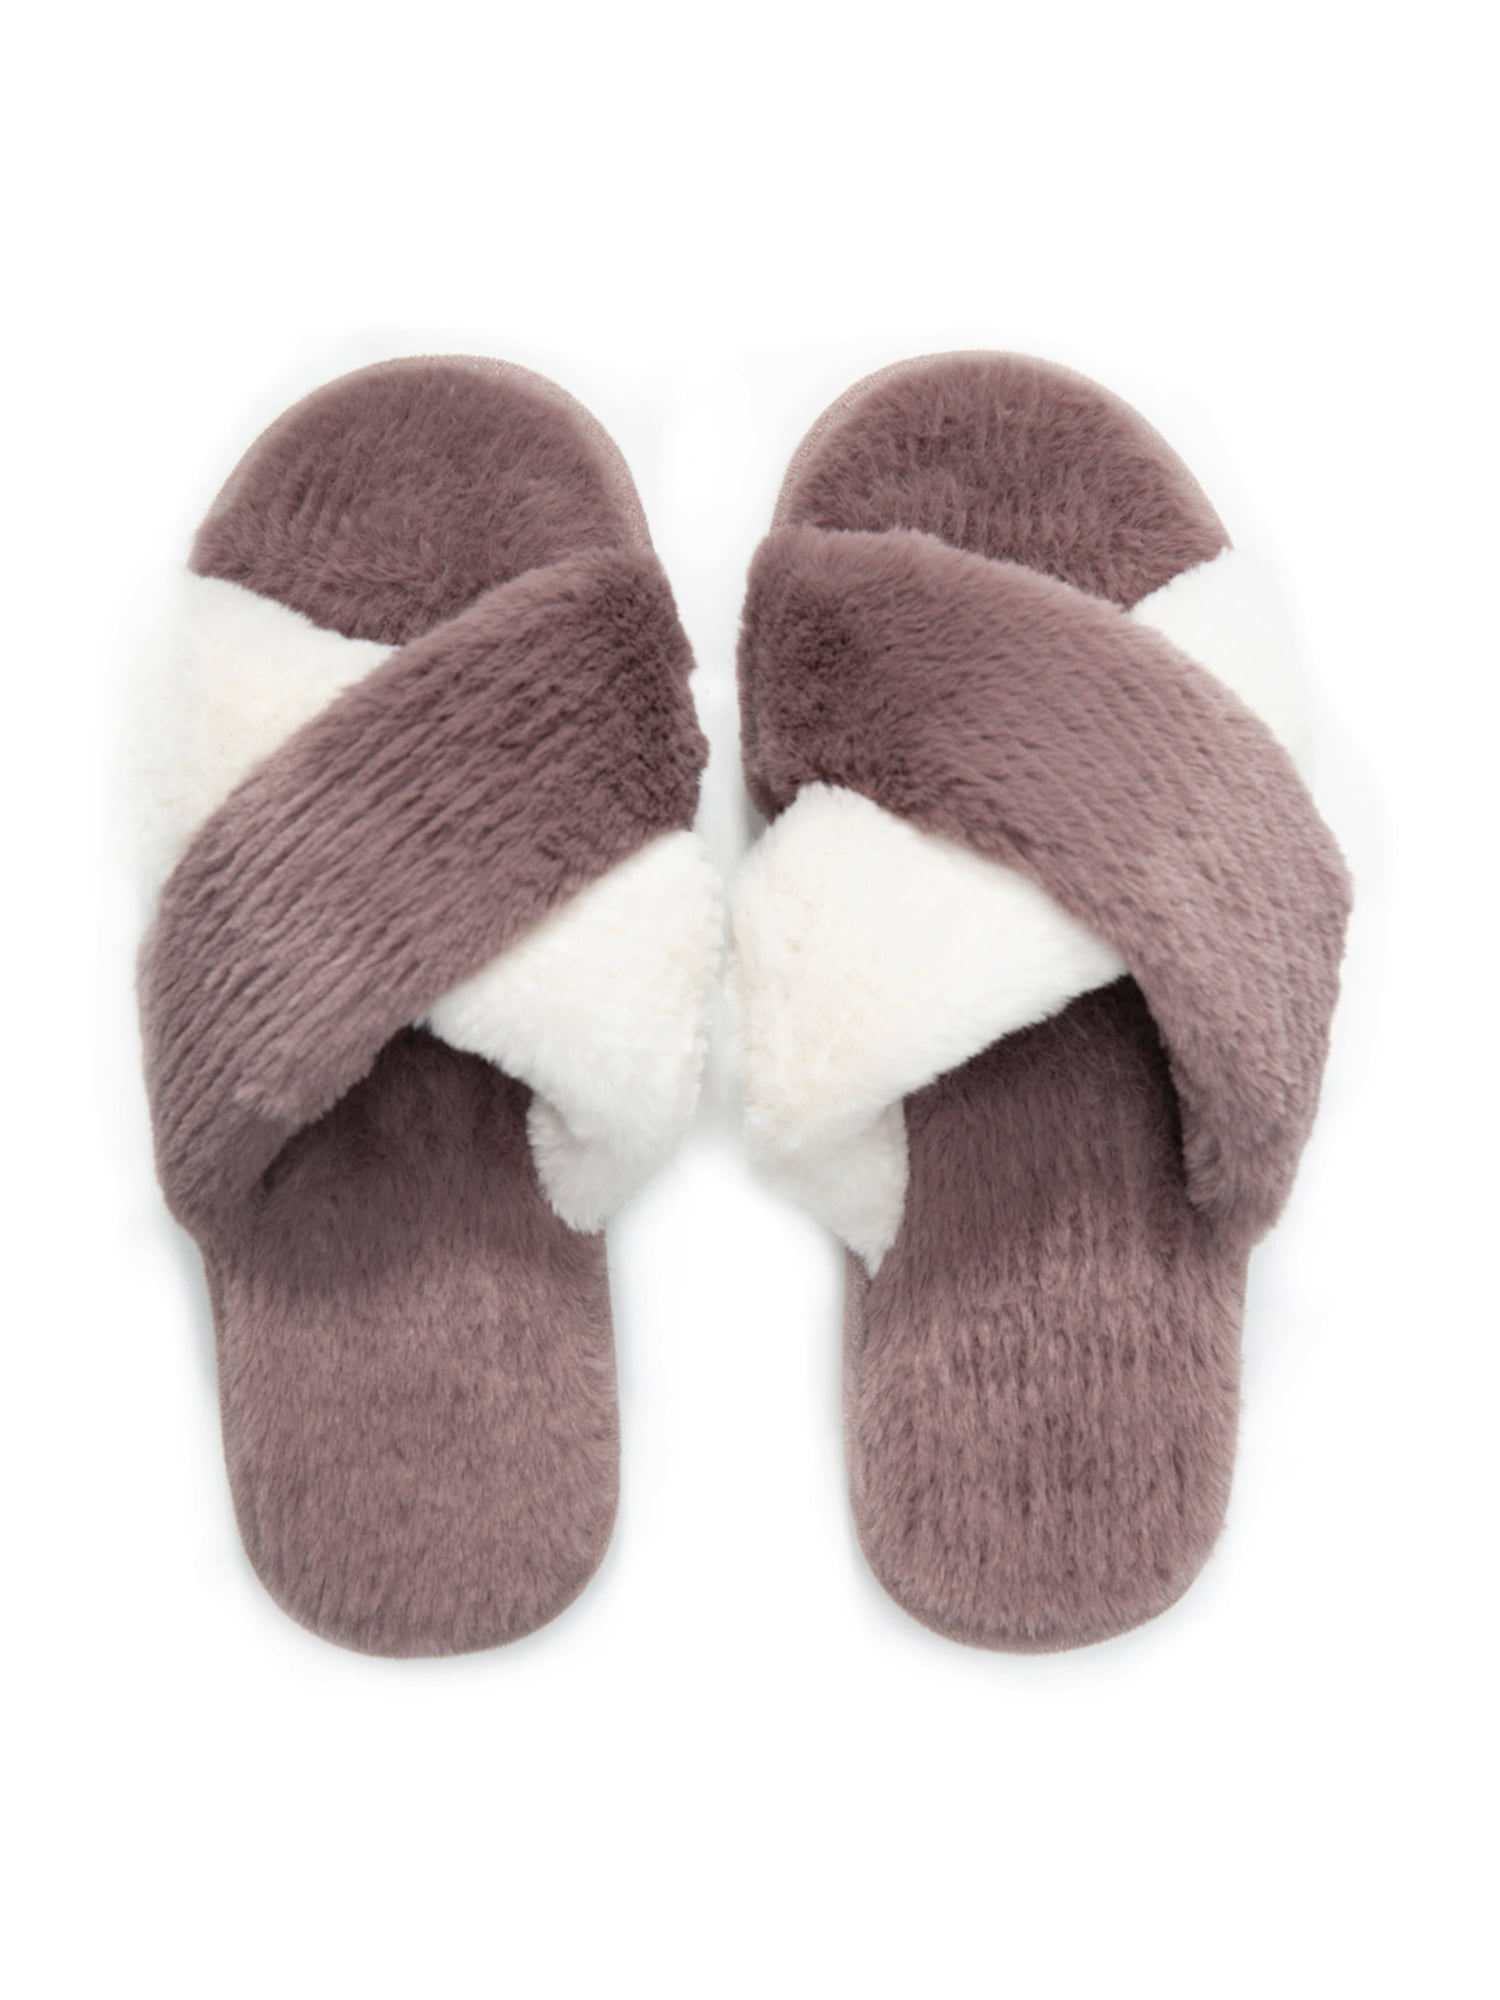 Details about  / Women Fuzzy Faux Fluffy Suede Fur Slippers Indoor Home Slip On Slides Size 7-8